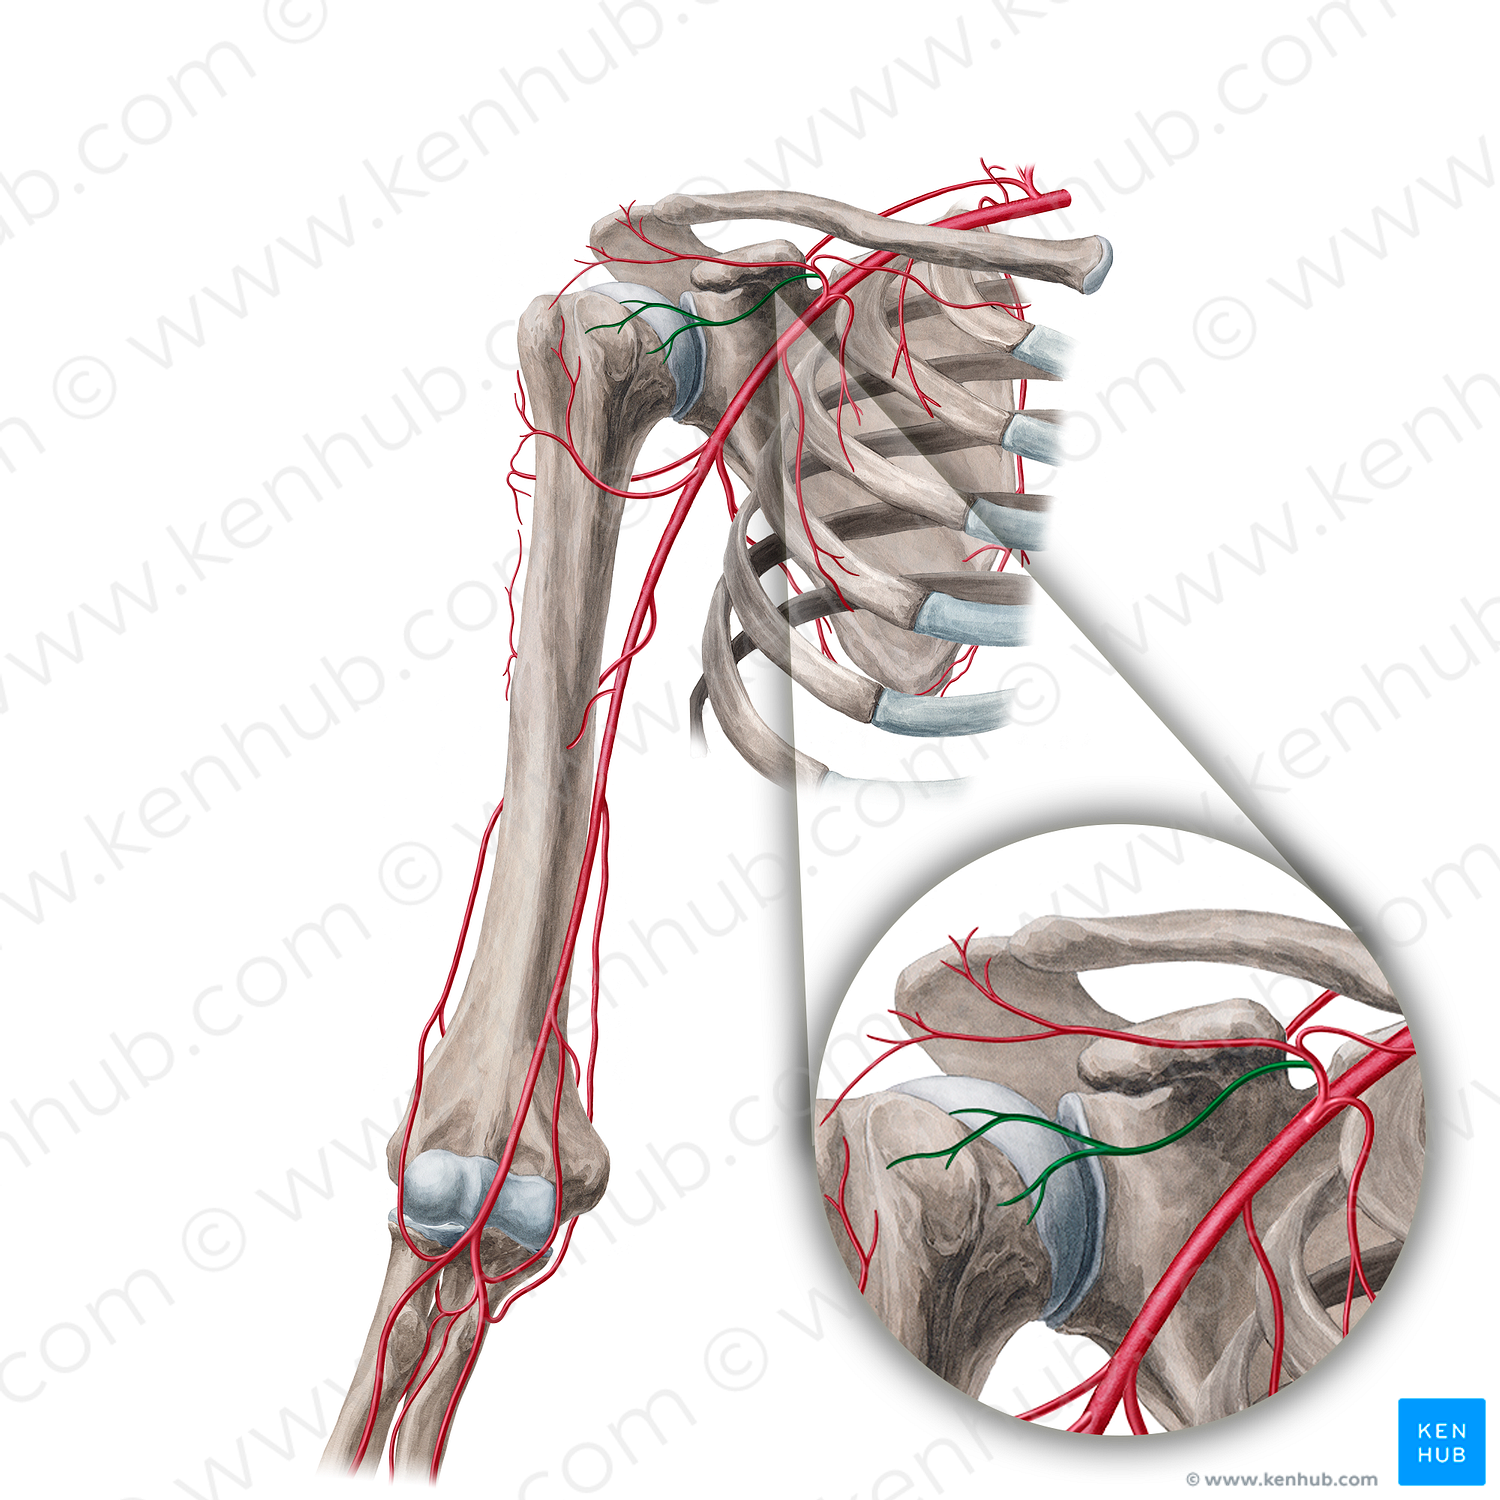 Deltoid branch of thoracoacromial artery (#18925)